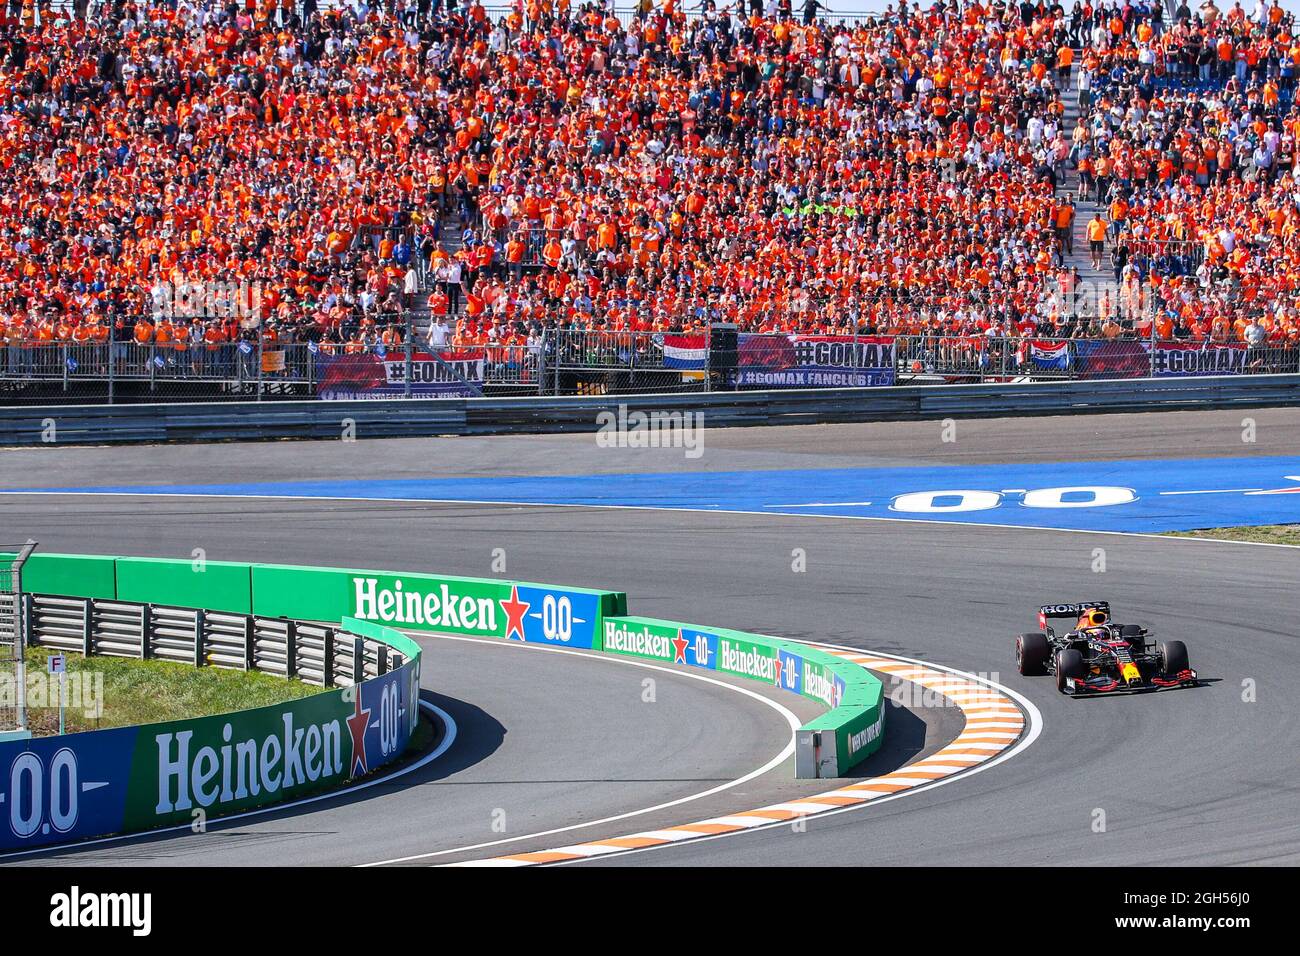 Kalmerend zwak telex ZANDVOORT, NETHERLANDS - SEPTEMBER 4: Fans and supporters in mostly orange  suits watching Max Verstappen during the Qualification of F1 Grand Prix of  The Netherlands at Circuit Zandvoort on September 4, 2021